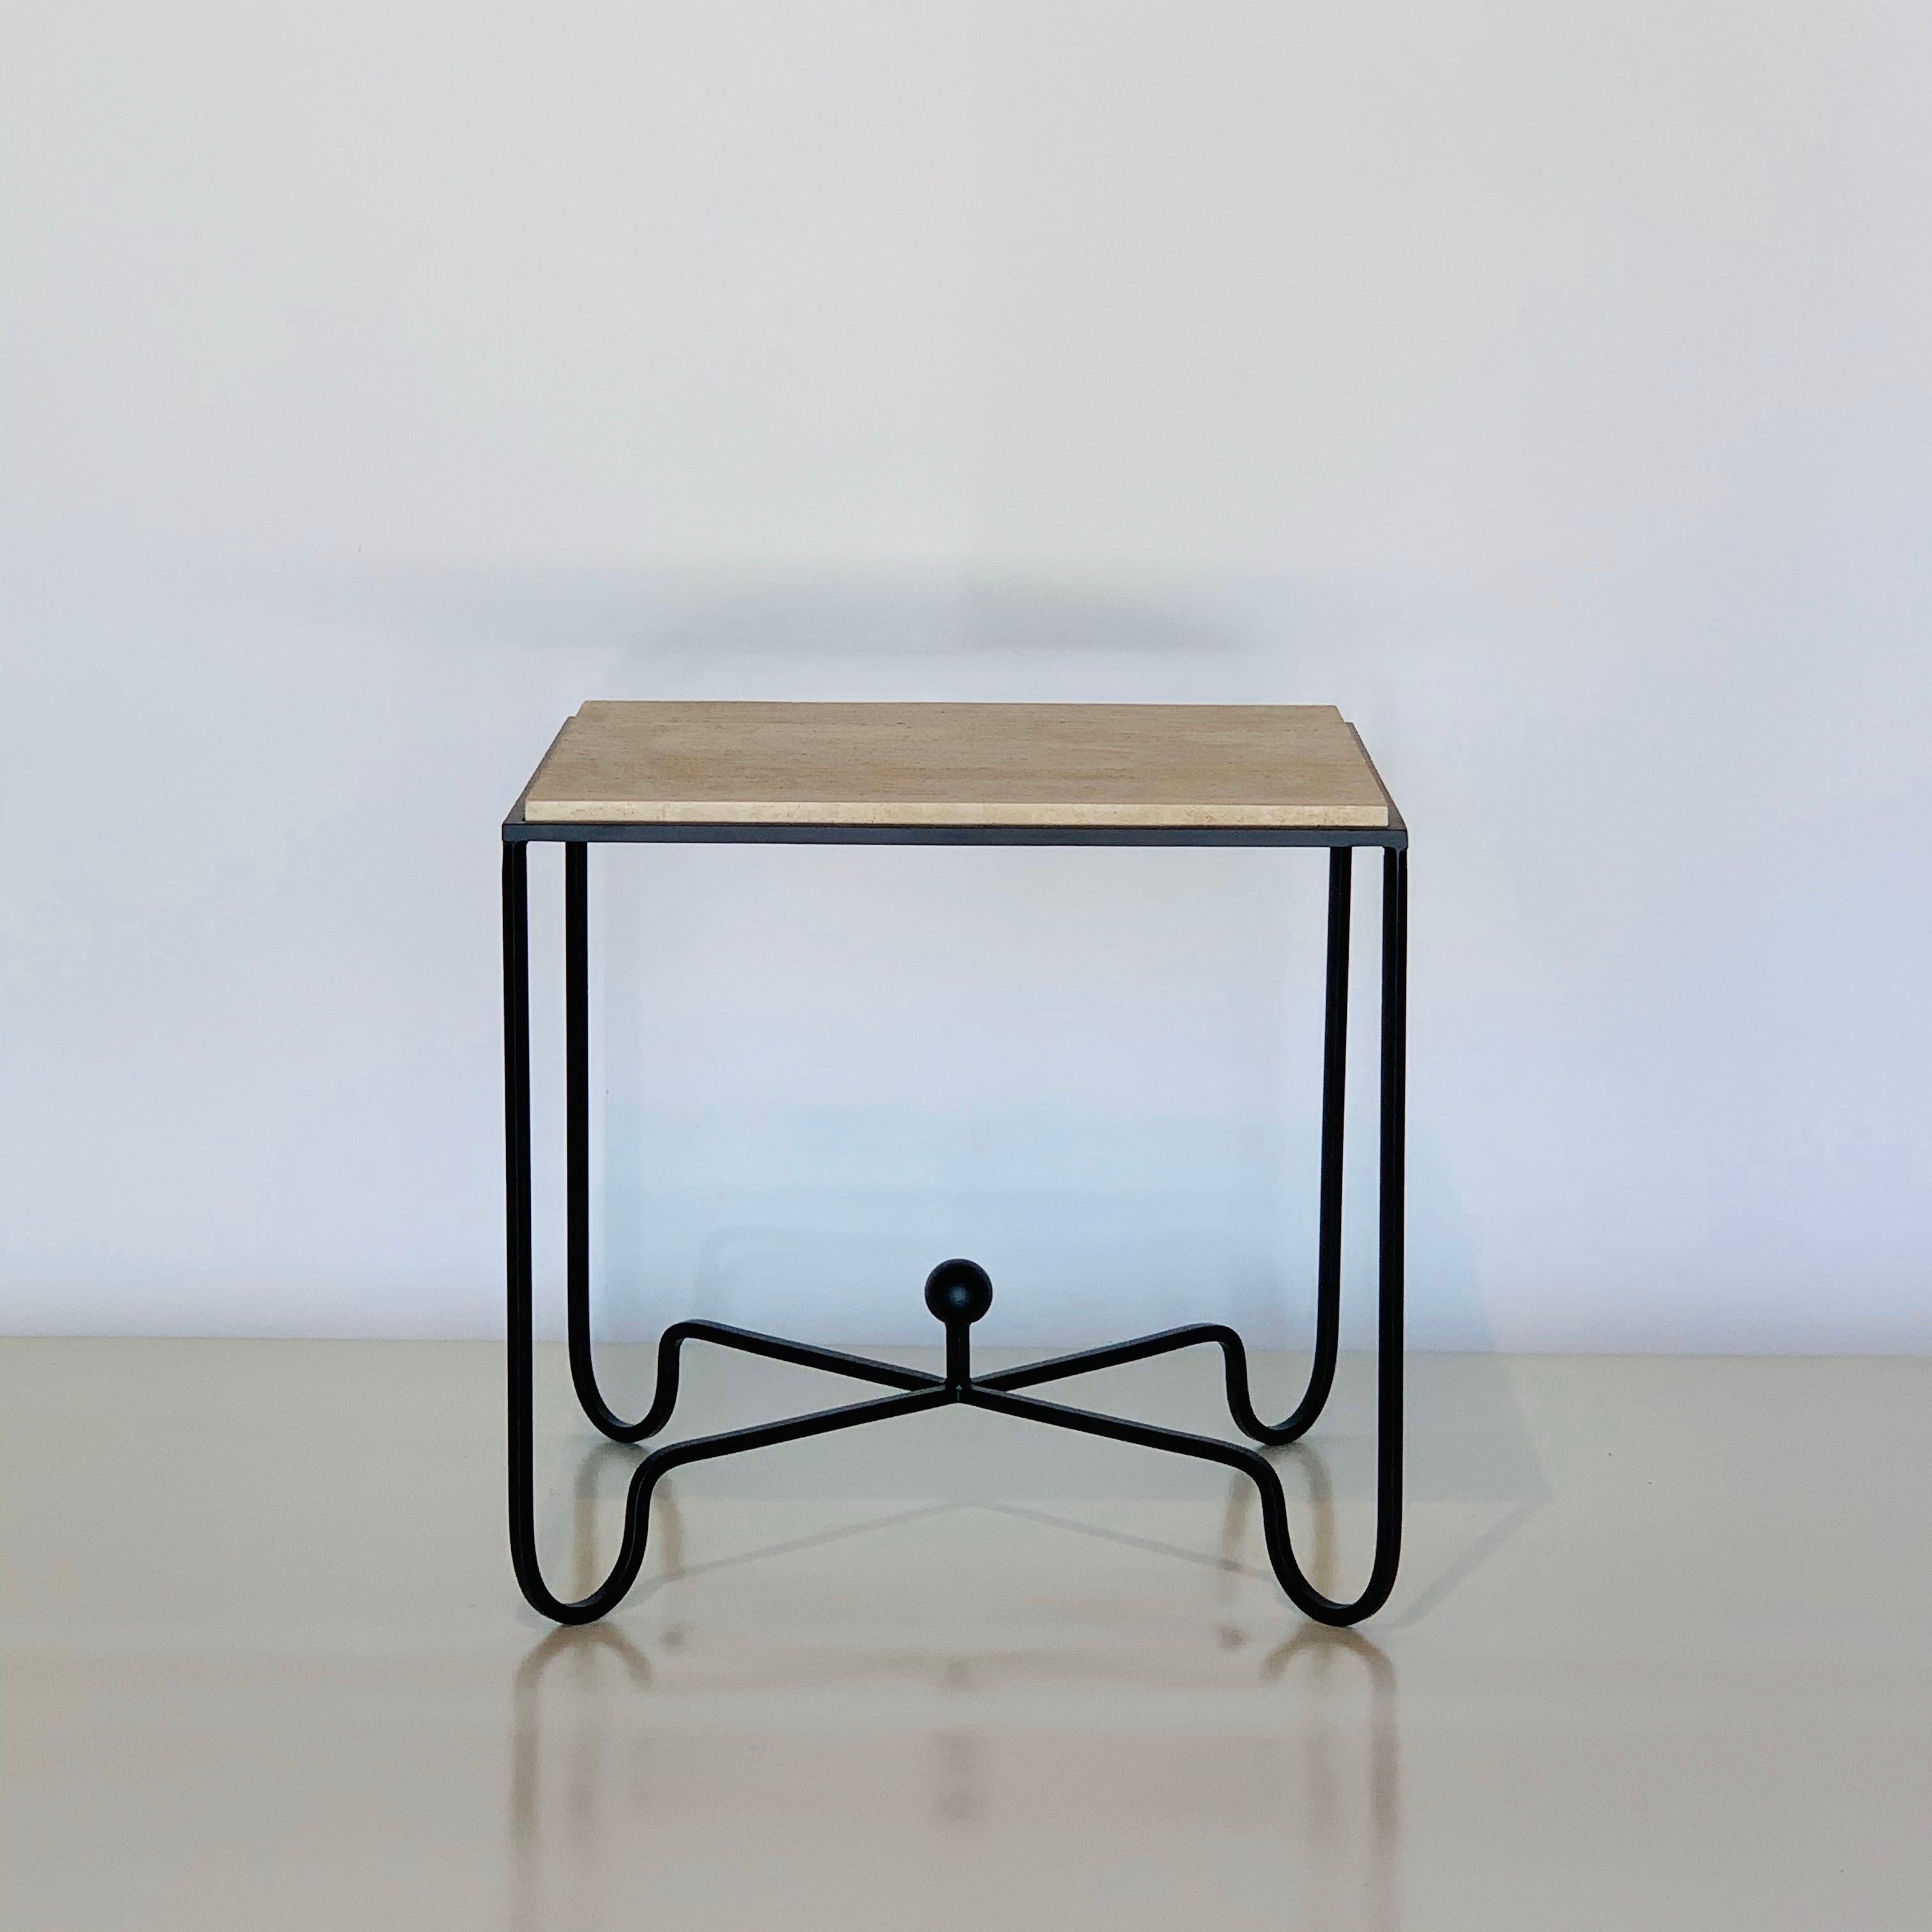 Pair of large ‘Entretoise’ cream travertine side tables or nightstands by Design Frères.